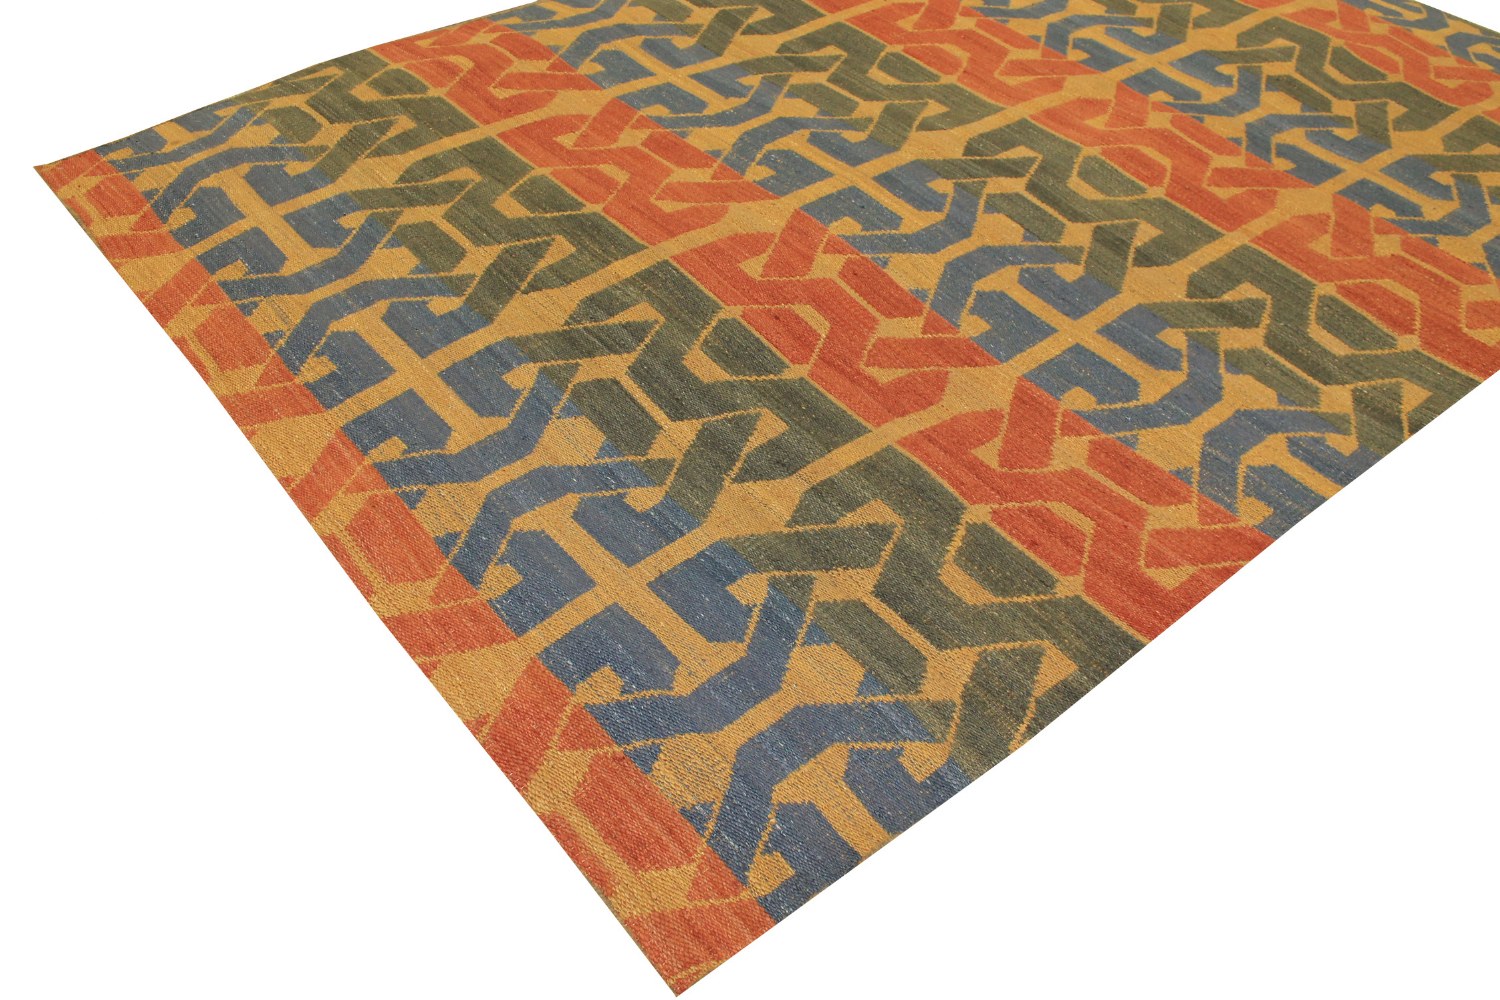 6x9 Flat Weave Hand Knotted Wool Area Rug - MR21026